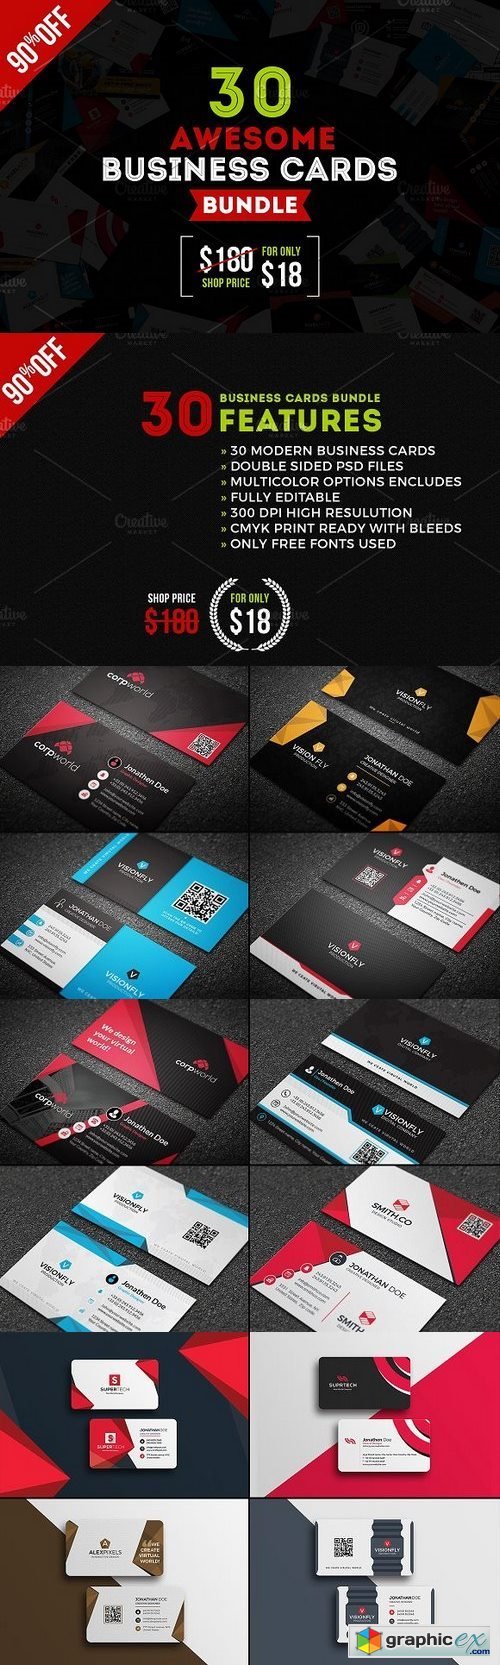 Awesome Business Card Bundle